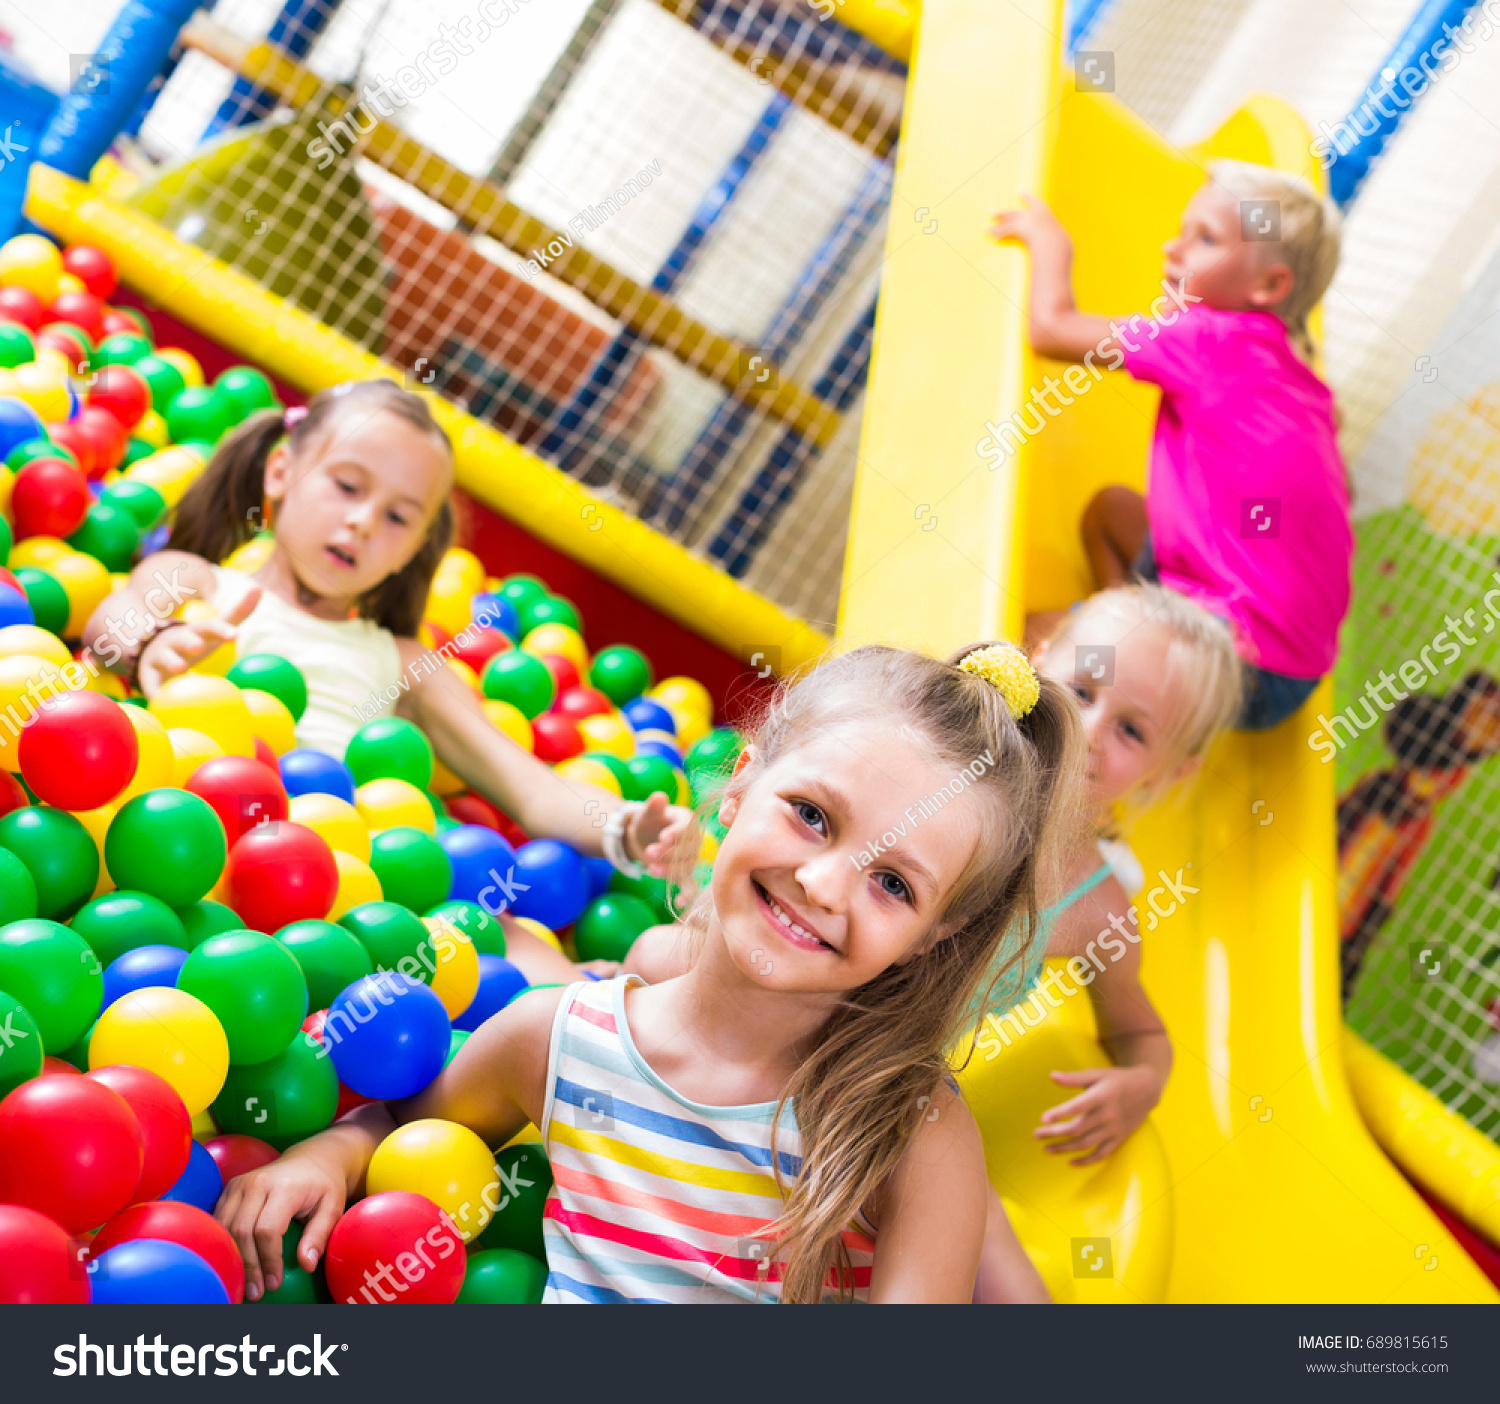 portrait of small smiling girl playing in pool with plastic multicolored balls
 #689815615